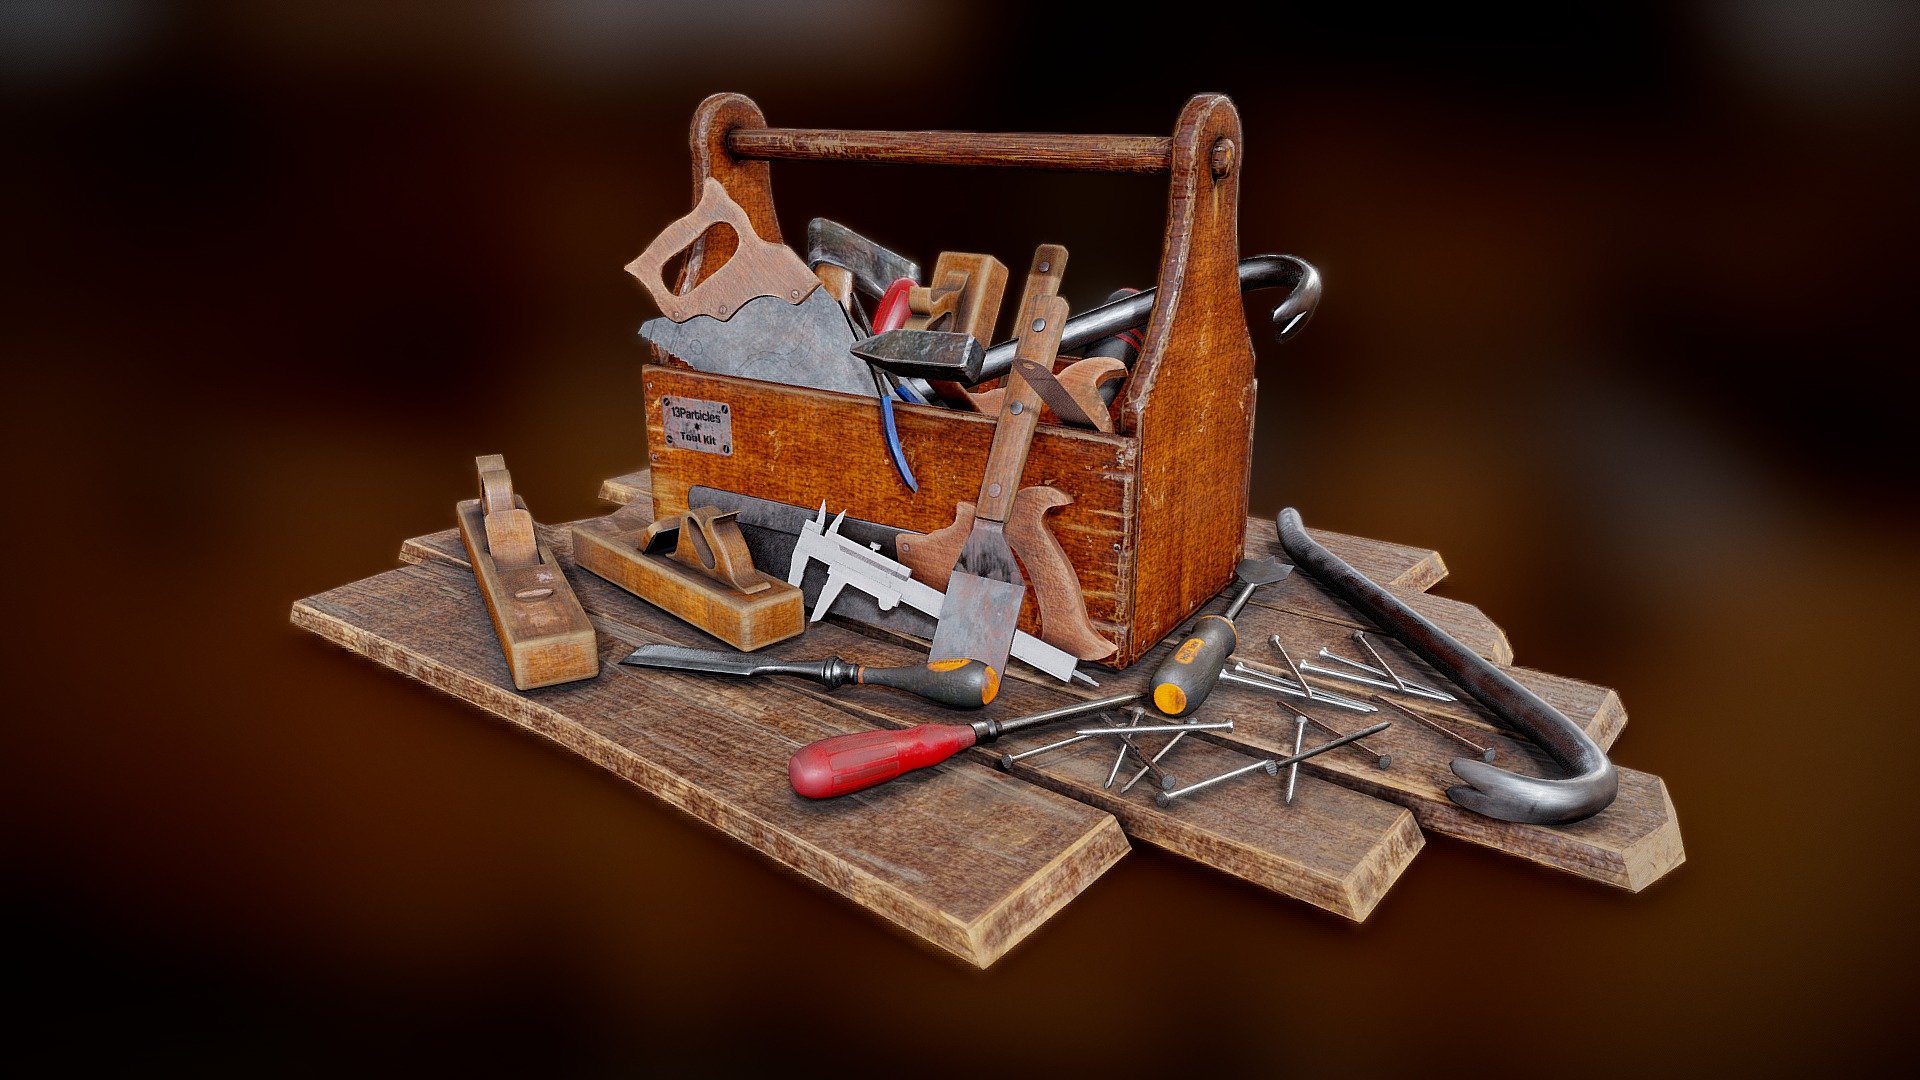 Tool Kit 3D Model From Scratch with 4K PBR textures maps by 13Particles.

For more artworks and updates follow us on:-

Instagram:- https://www.instagram.com/13particles/
Artstation:- https://thirteenparticles.artstation.com
Twitter:- https://twitter.com/13Particles
Facebook:- https://www.facebook.com/13Particles/
Linkedin:- https://www.linkedin.com/company/13particles - Tool Kit ( In House Project ) - 3D model by 13 Particles (@13particles) 3d model